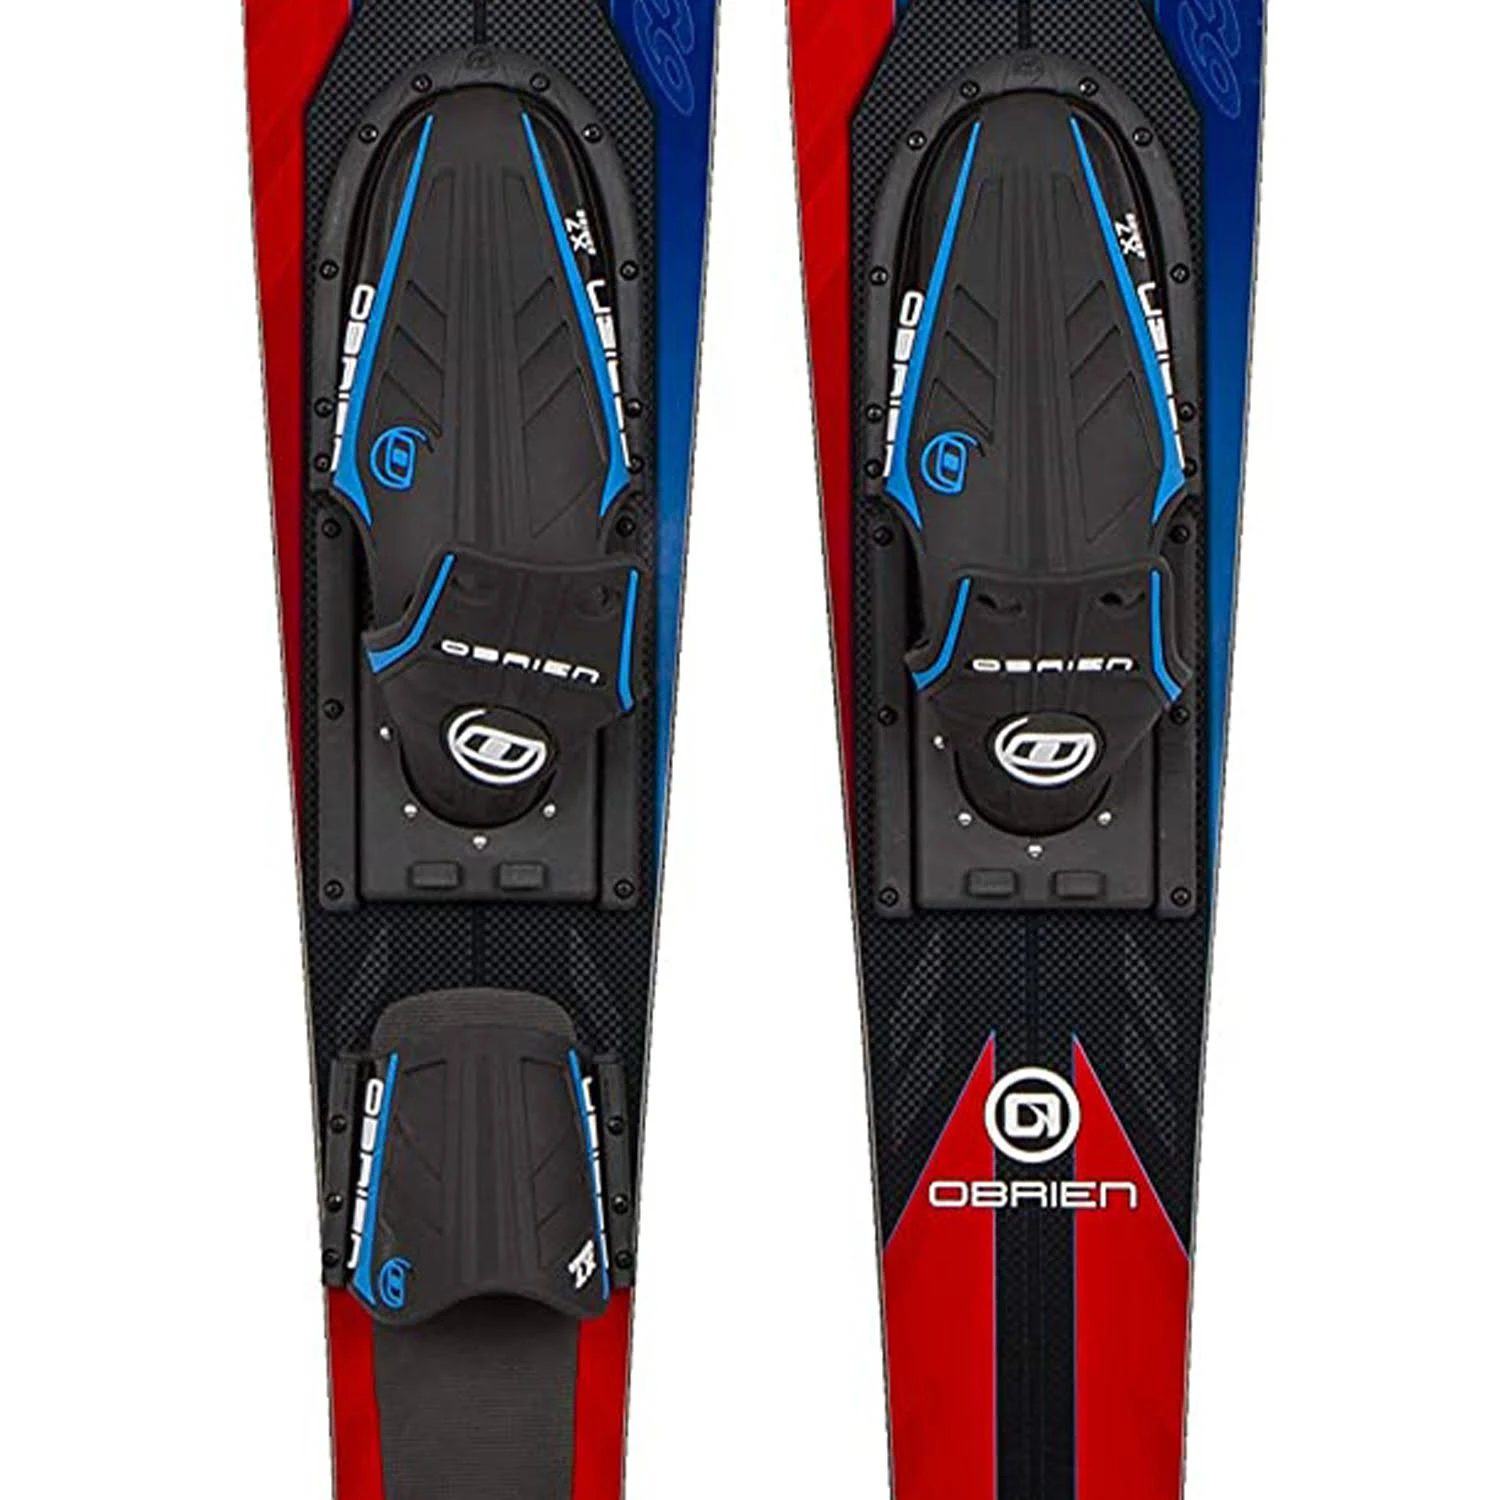 O’Brien Vortex Combo Water Skis, Red